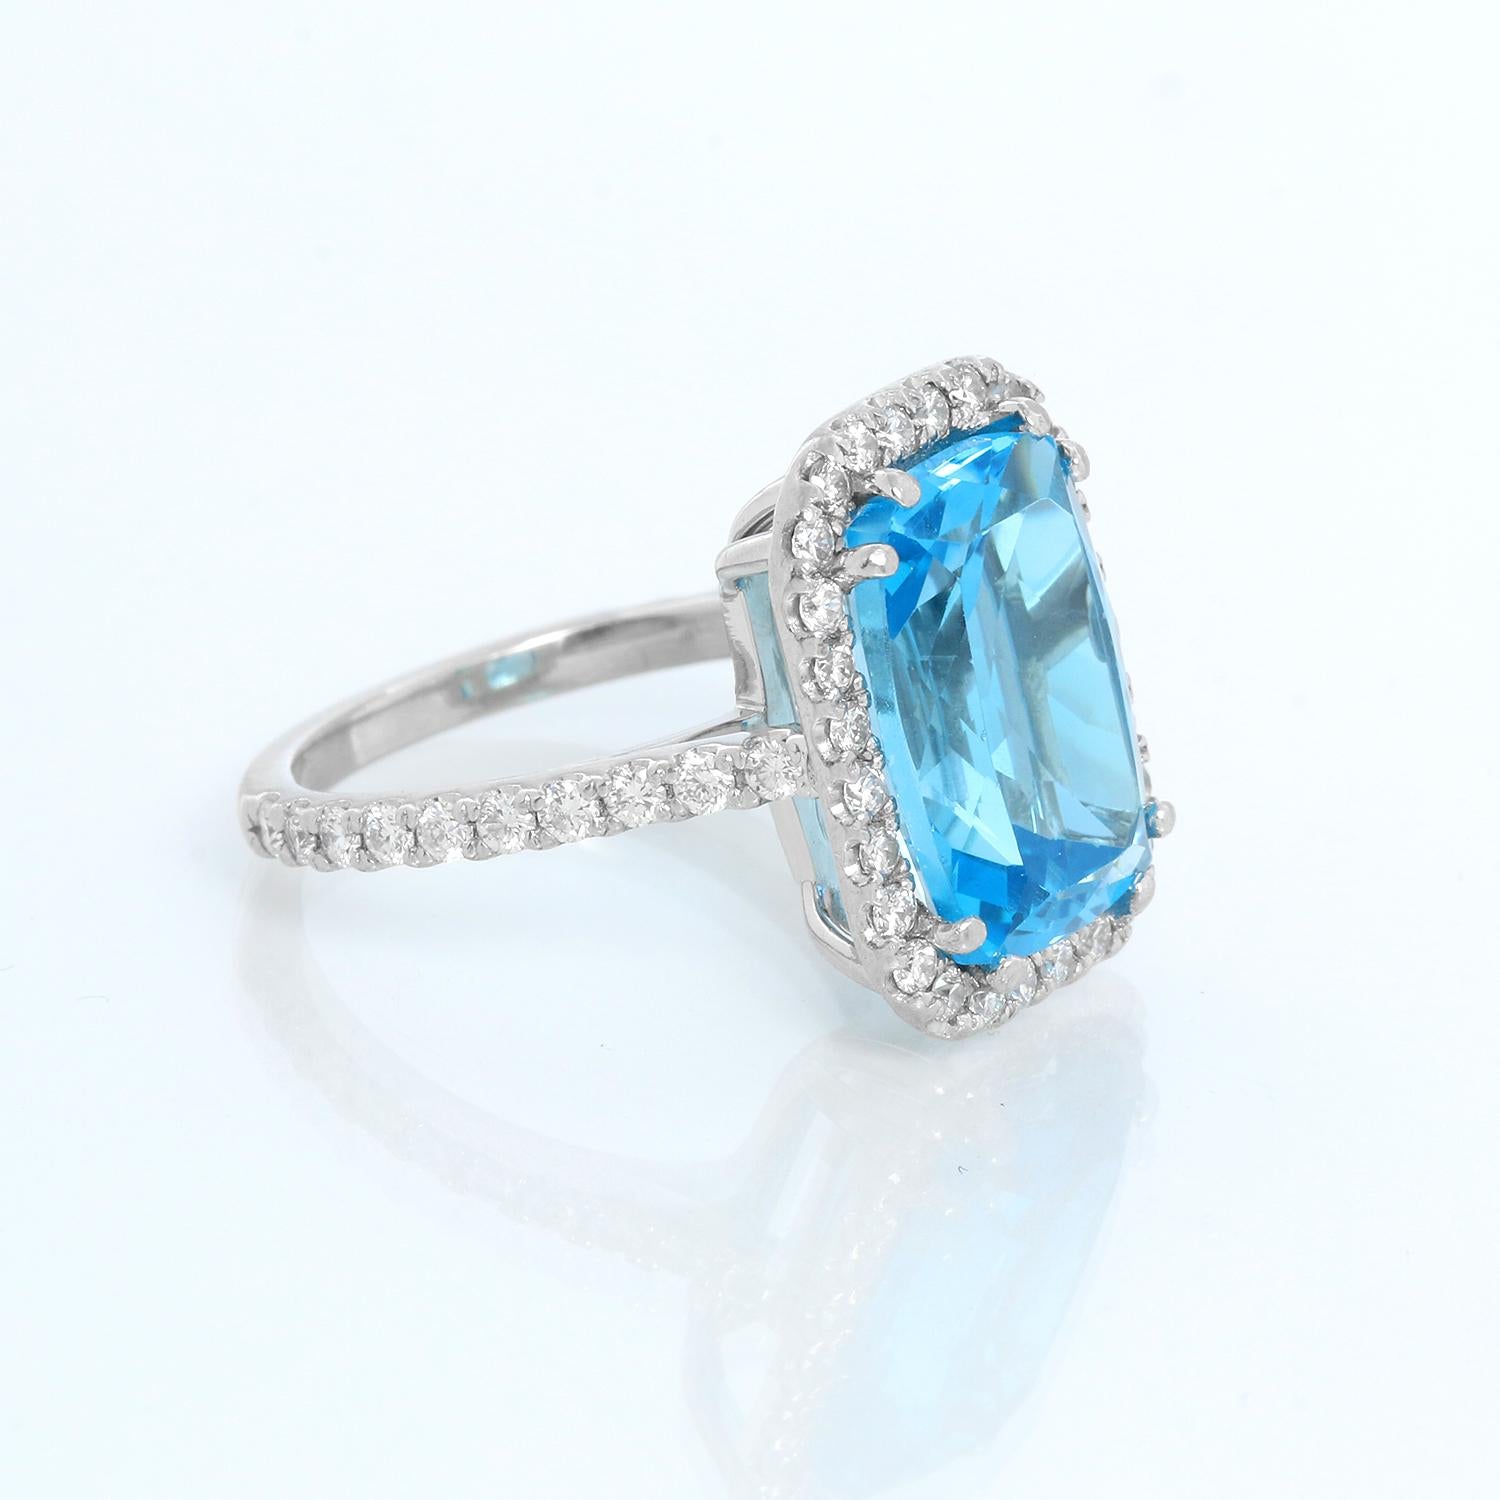 7 Ct. London Topaz & Diamonds White Gold Ring Size 6 - 7 ct. London Topaz  set in 18K white gold featuring 48 (0.82ctw.) diamonds with VS2-clarity and G-color. Size 6 and can be sized.